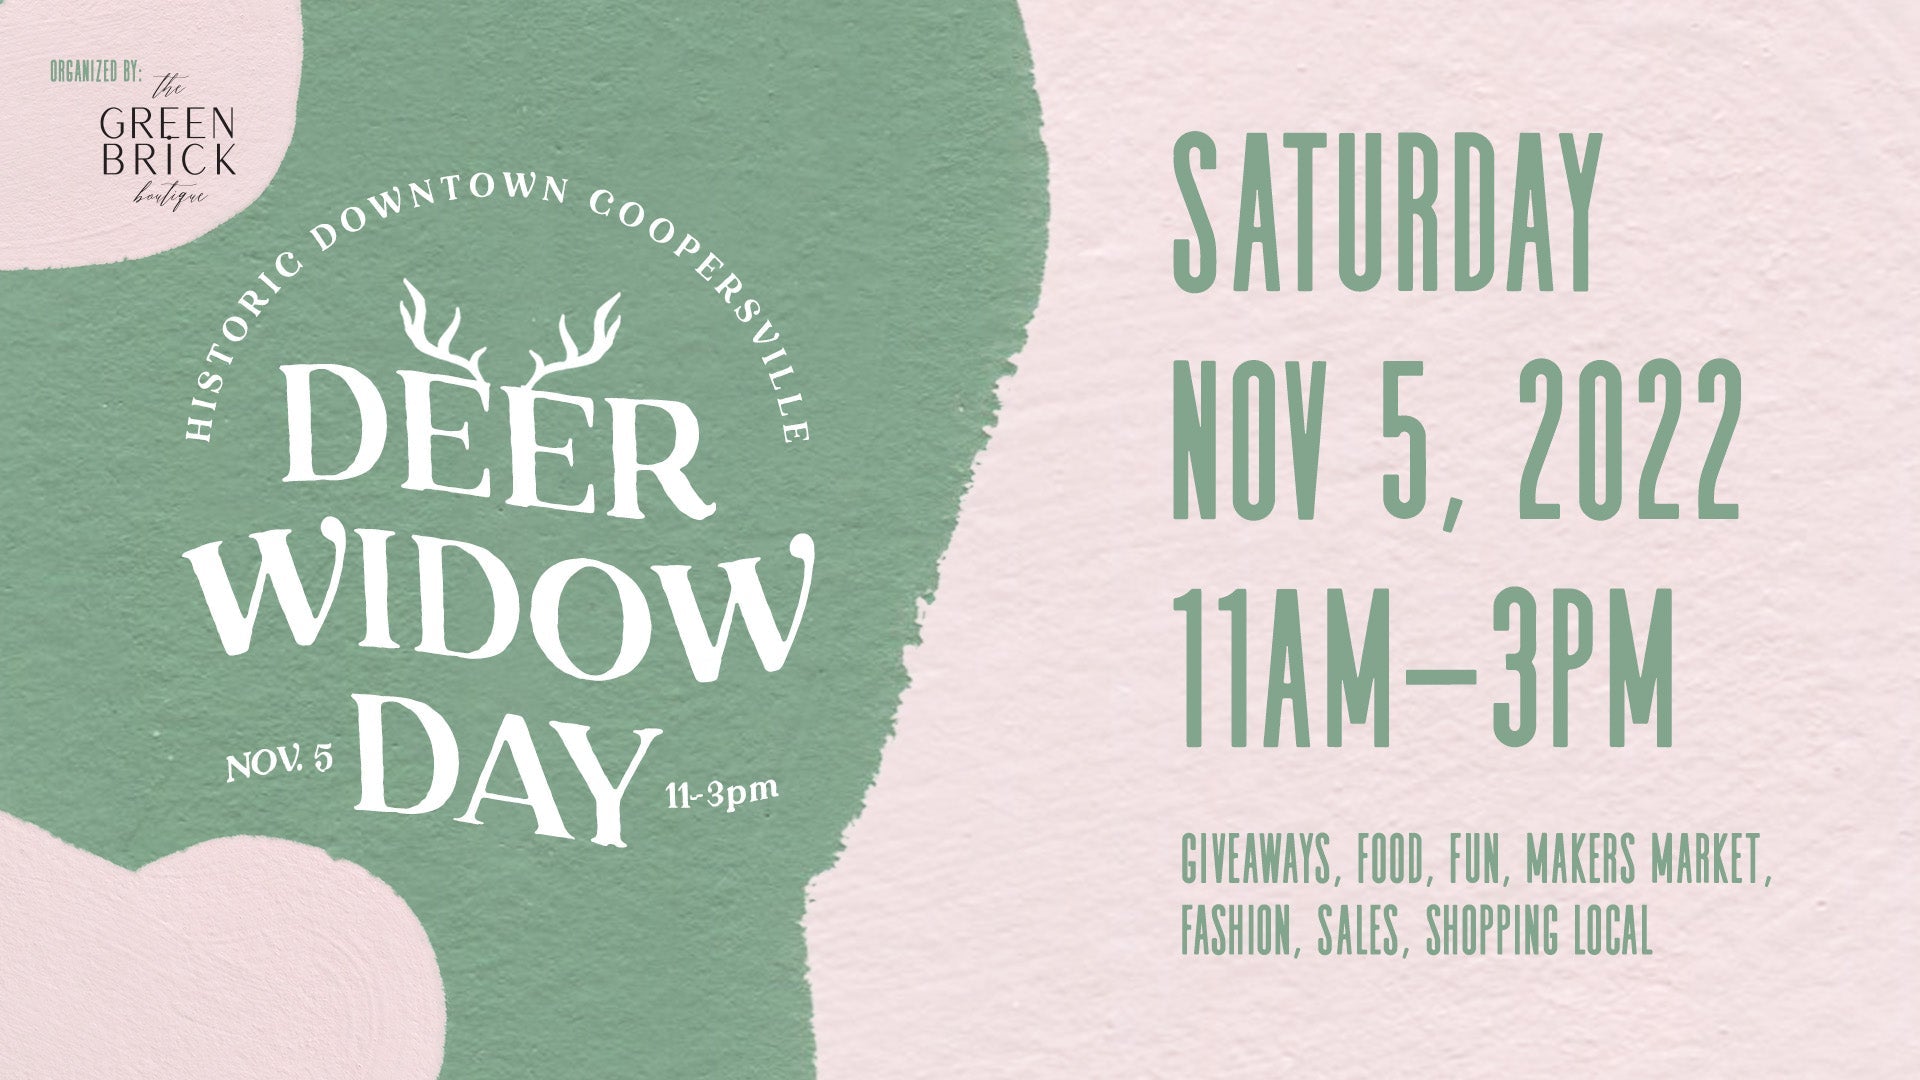 4th Annual Deer Widow Day | Downtown Coopersville, MI - The Green Brick Boutique